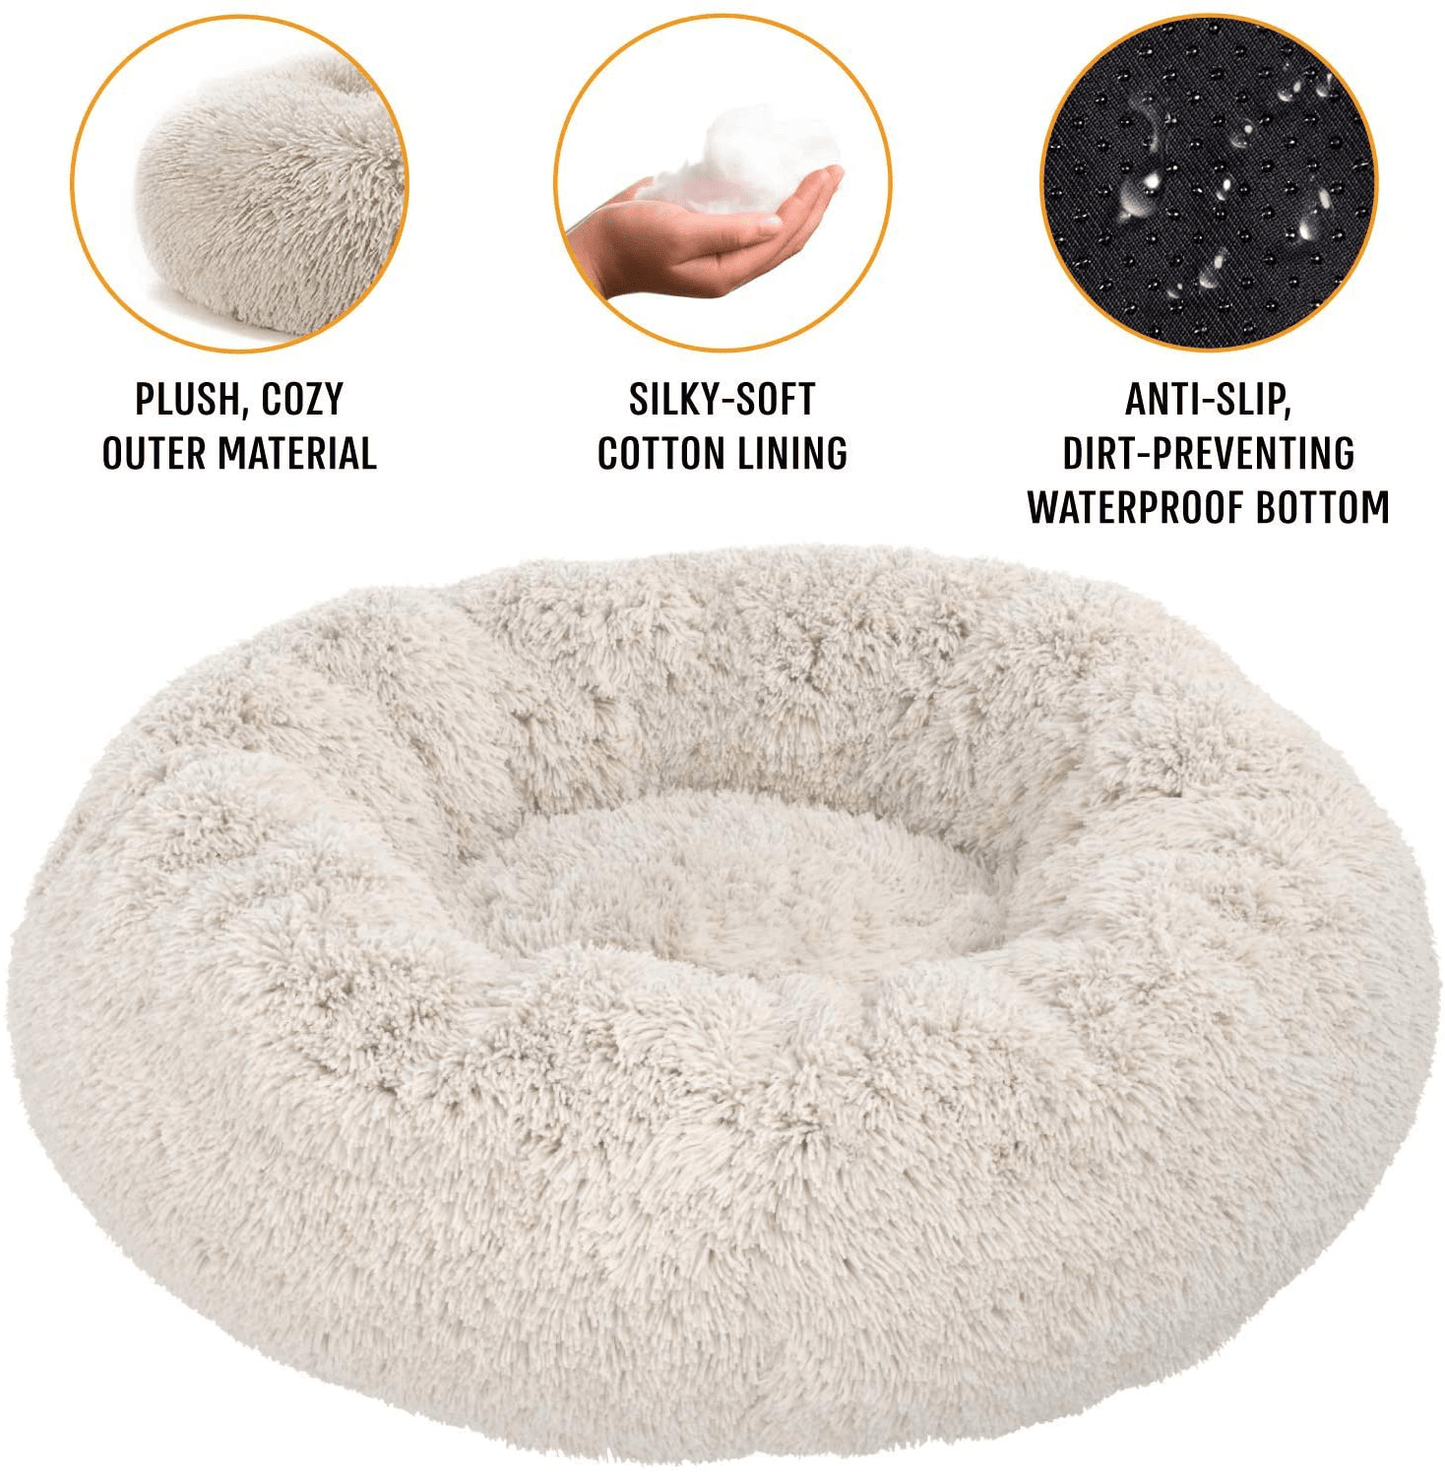 Active Pets Plush Calming Dog Bed, Donut Dog Bed for Small Dogs, Medium & Large, anti Anxiety Dog Bed, Soft Fuzzy Calming Bed for Dogs & Cats, Comfy Cat Bed, Marshmallow Cuddler Nest Calming Pet Bed